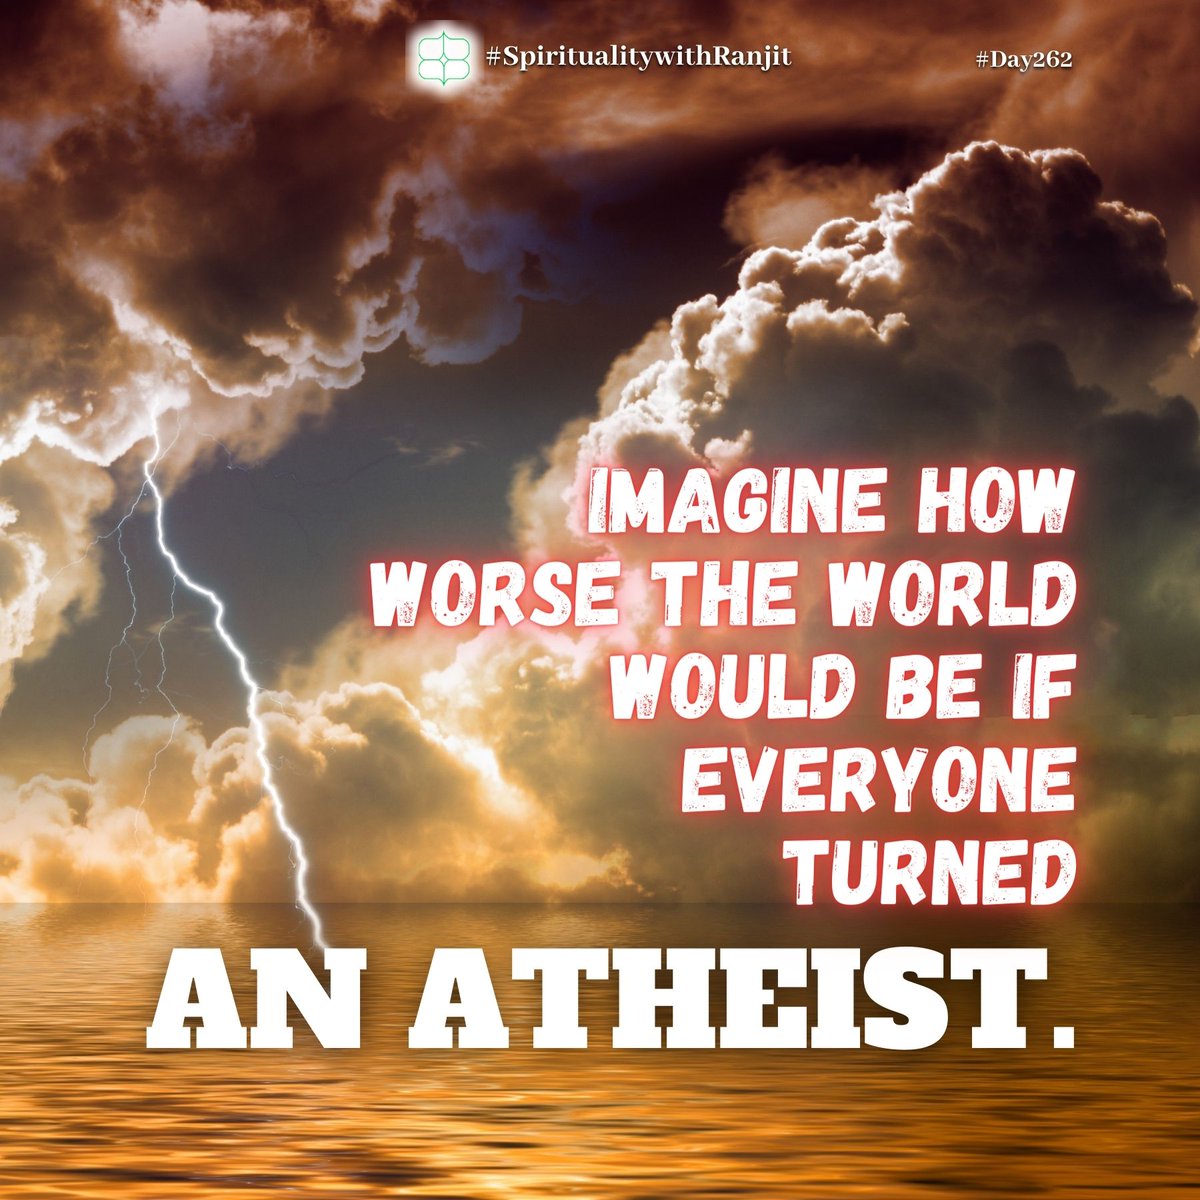 Read in today’s post about a hypothetical situation of global atheism.Do read all the messages in this thread! Retweet if you like. (1/5) #Post262  #SpiritualitywithRanjit @SpiritualitywithRanjit  #Atheism  #Believers  #Religions  #God